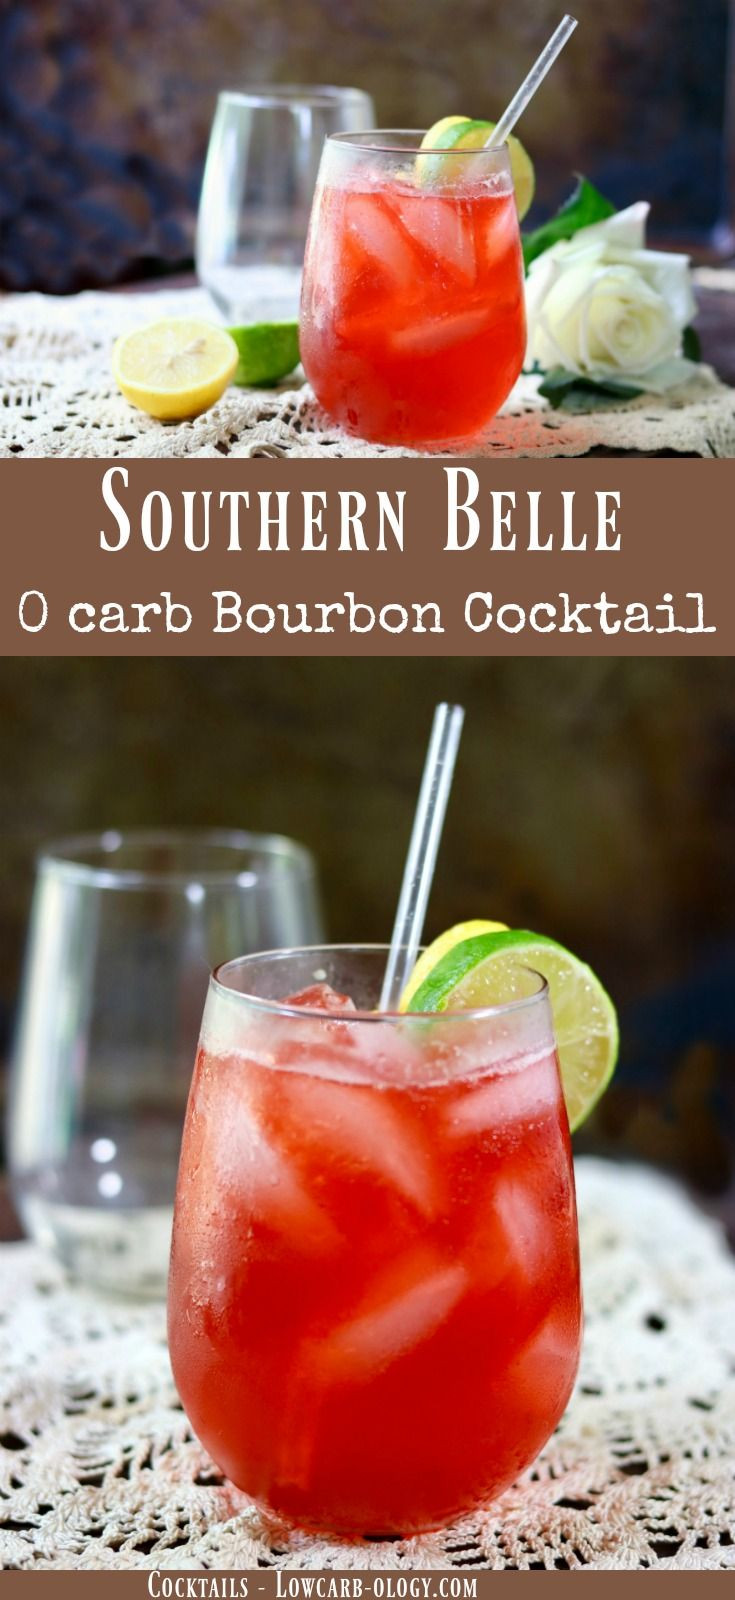 Summer Bourbon Drinks
 Summer Bourbon Cocktail The Southern Belle lowcarb ology